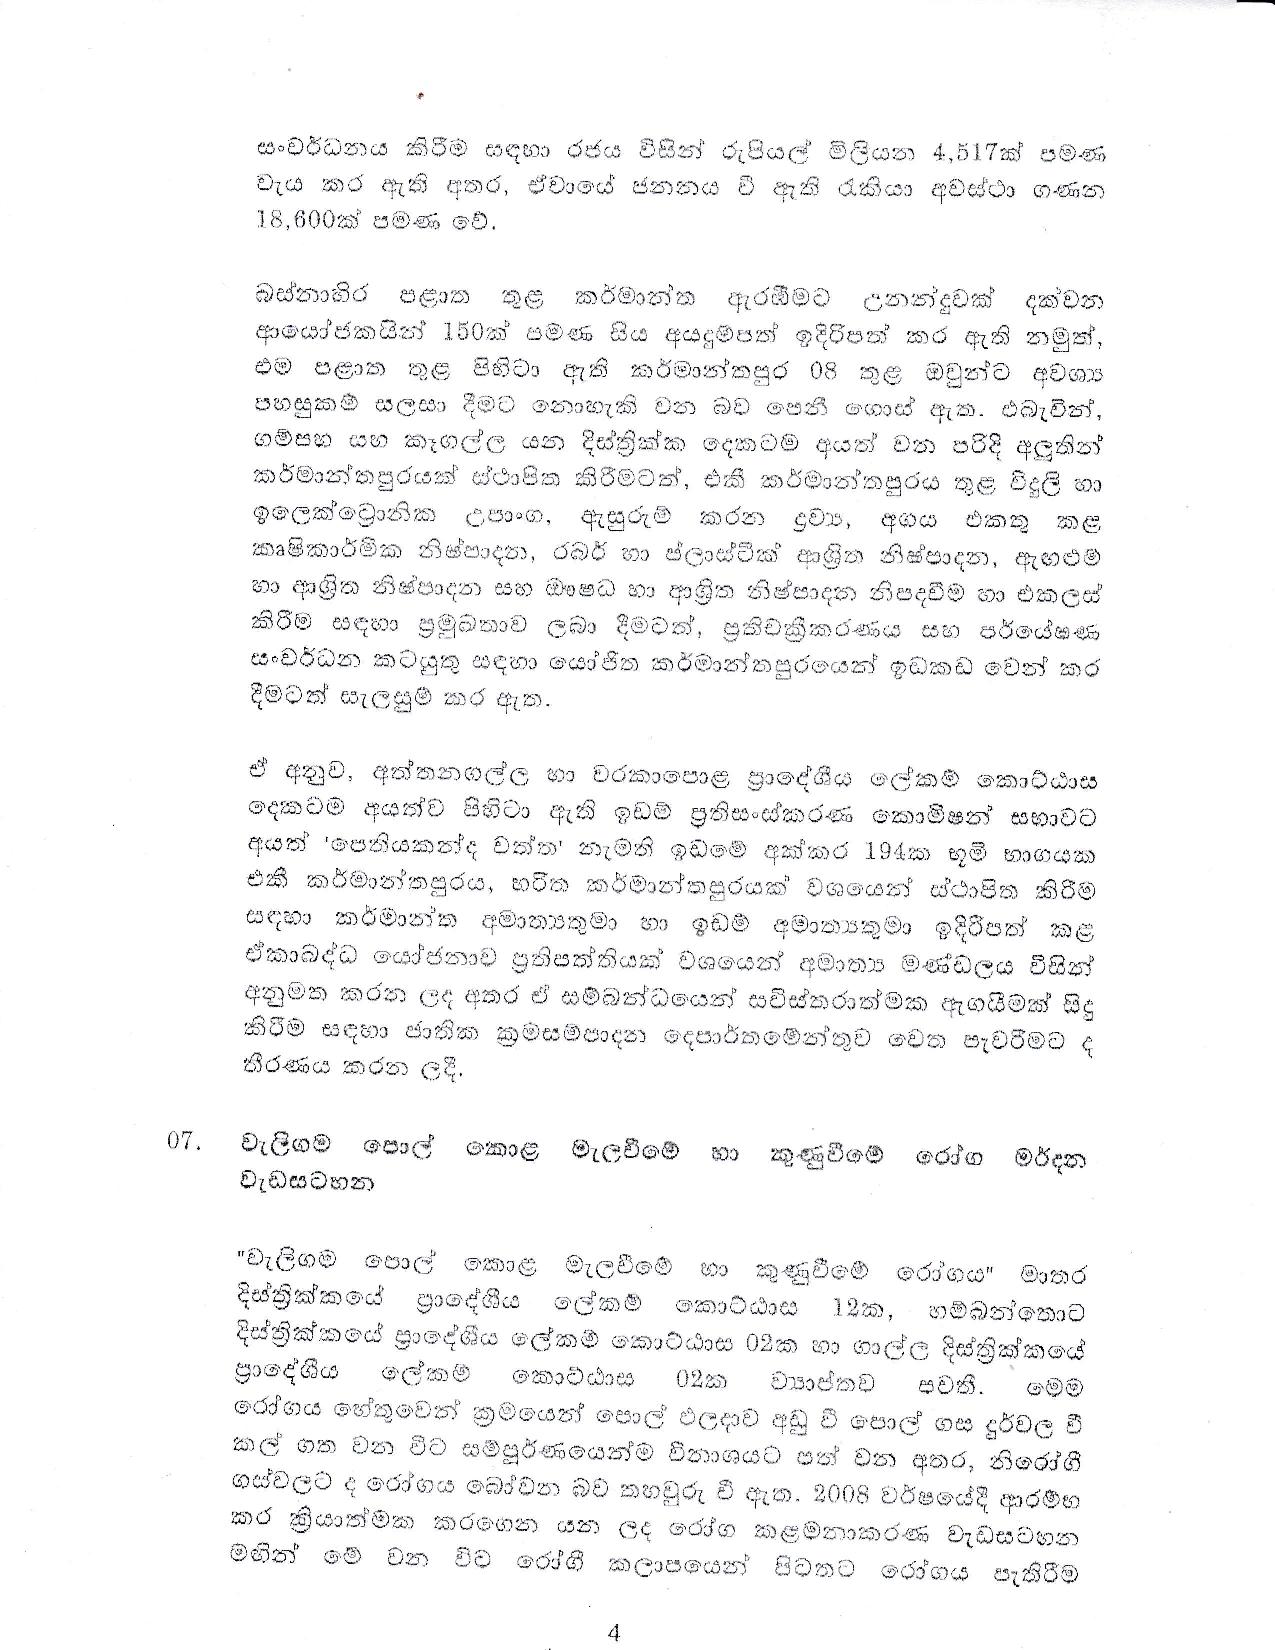 Cabinet Decision on 16.09.2020 page 004